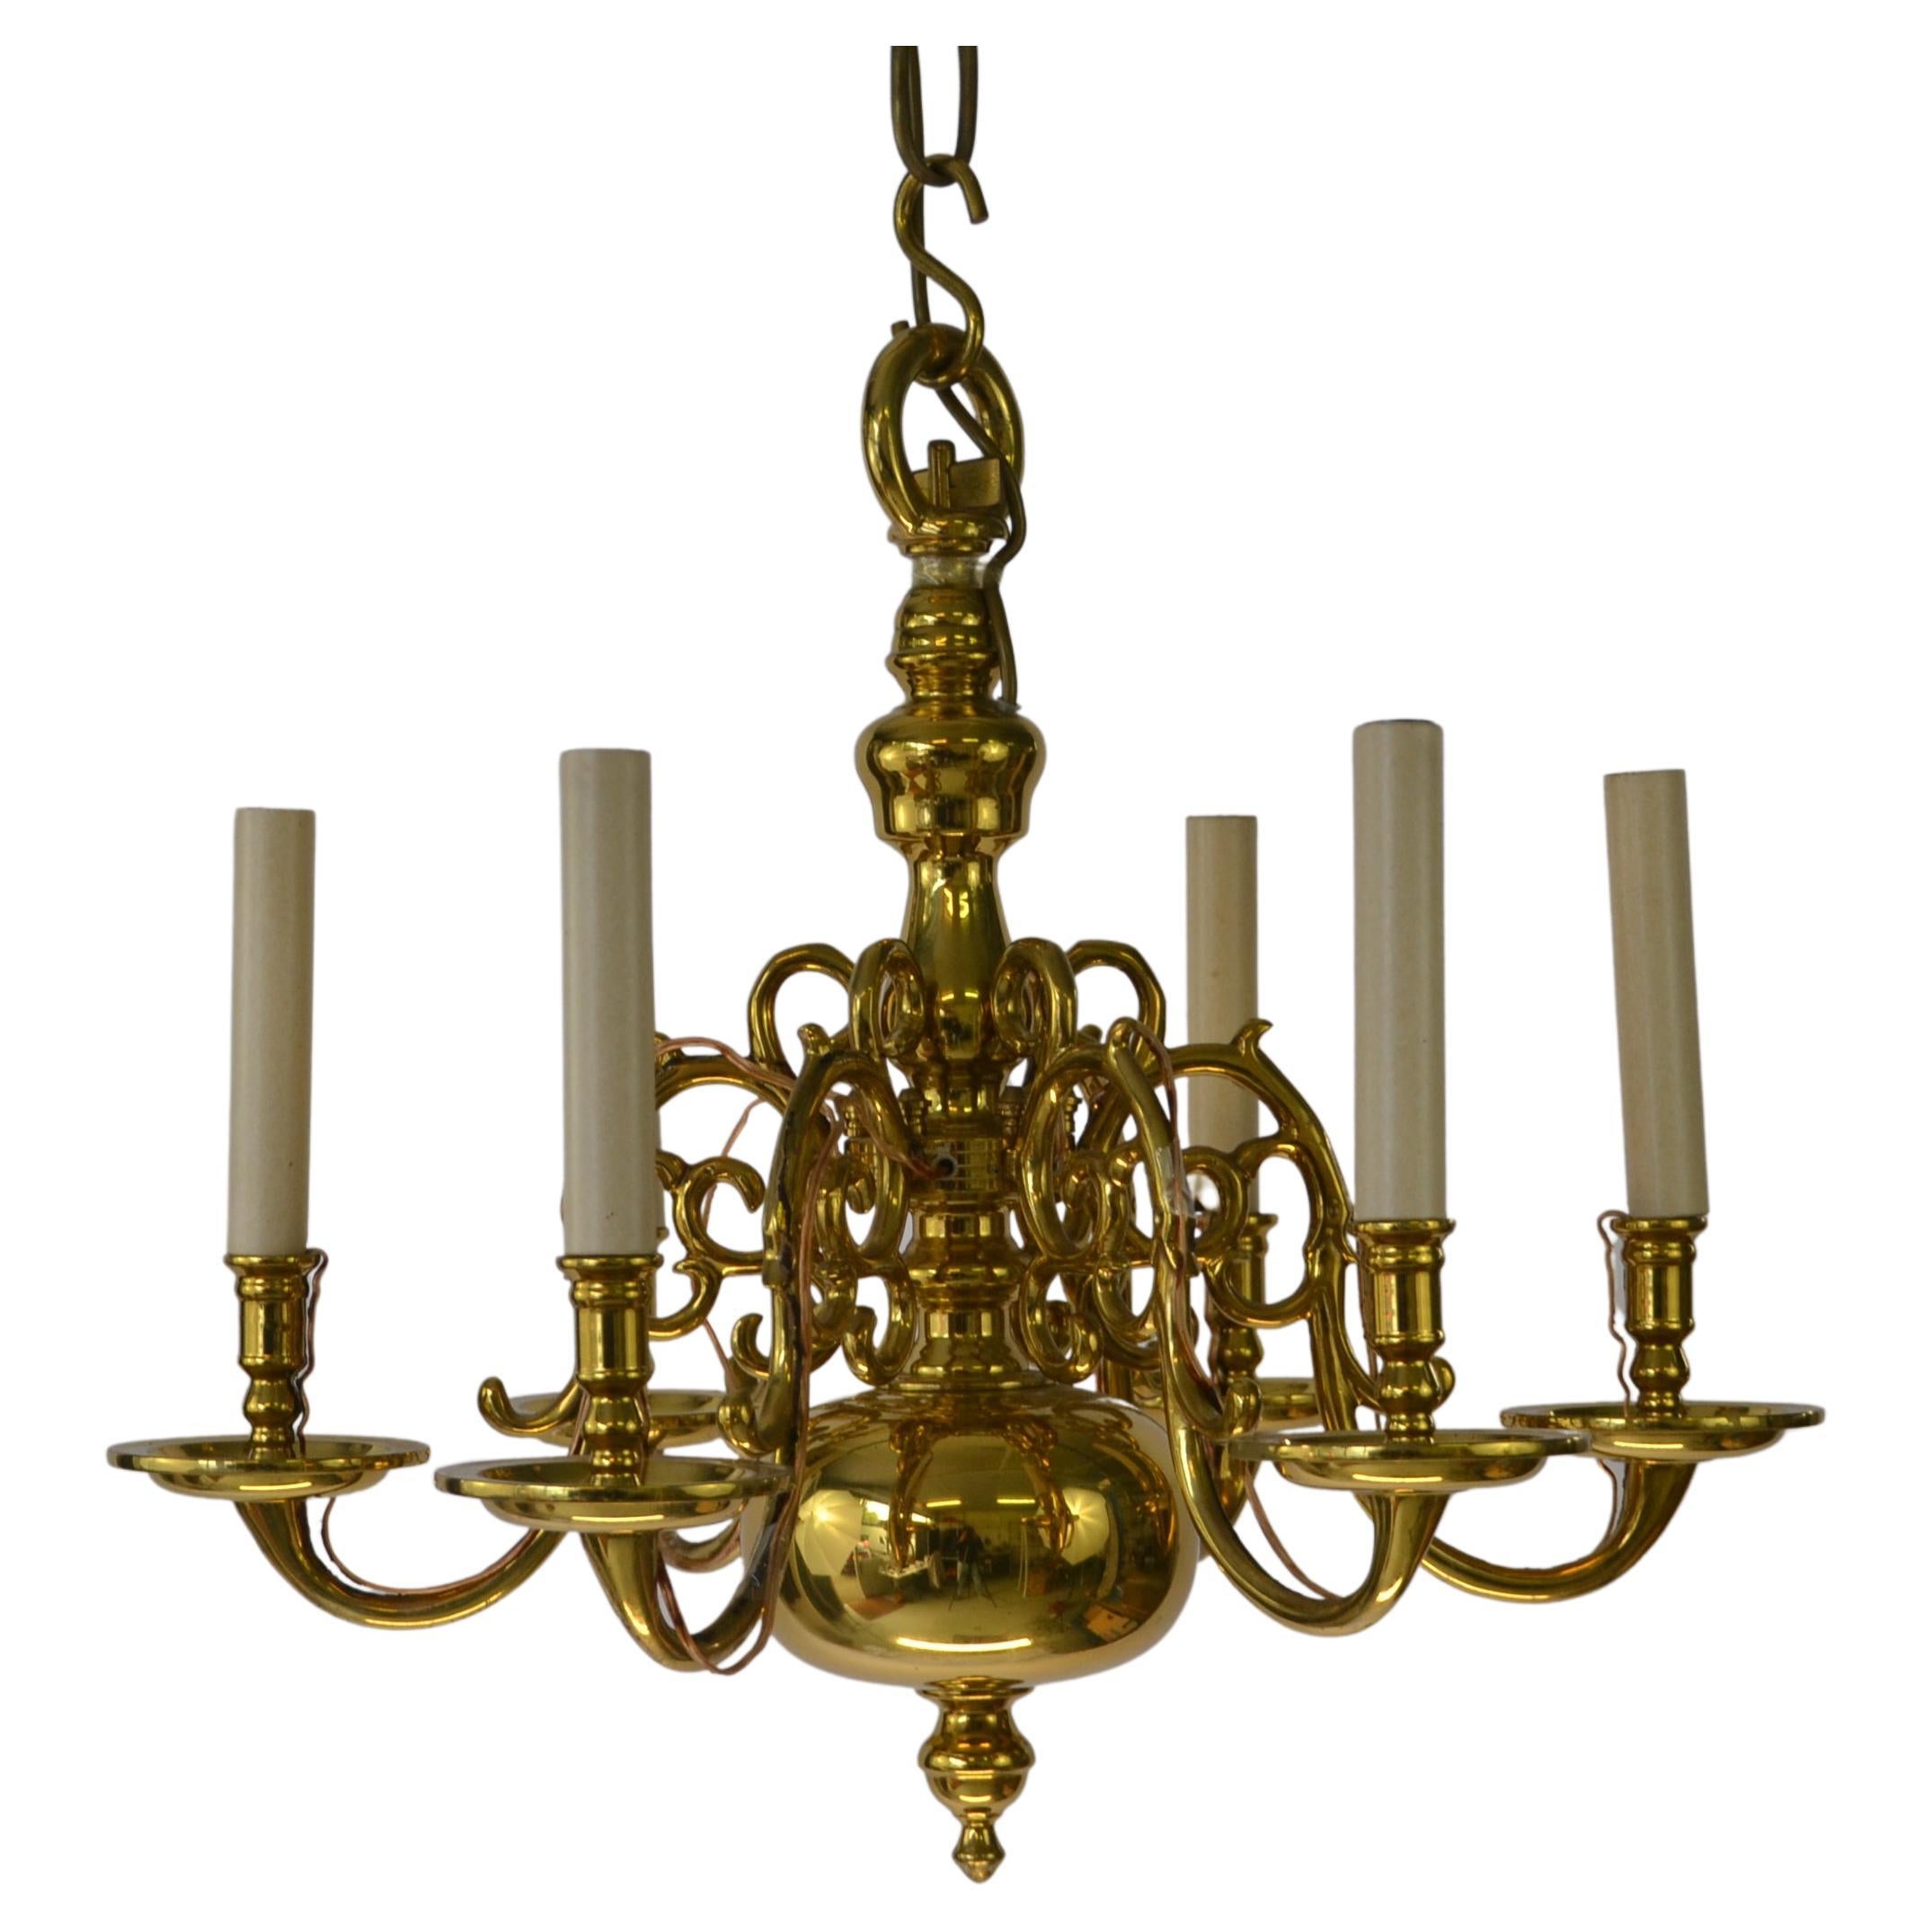 1 Tier 17th Century Electric Model Dutch Brass Chandelier with 6 Lights H54xW57